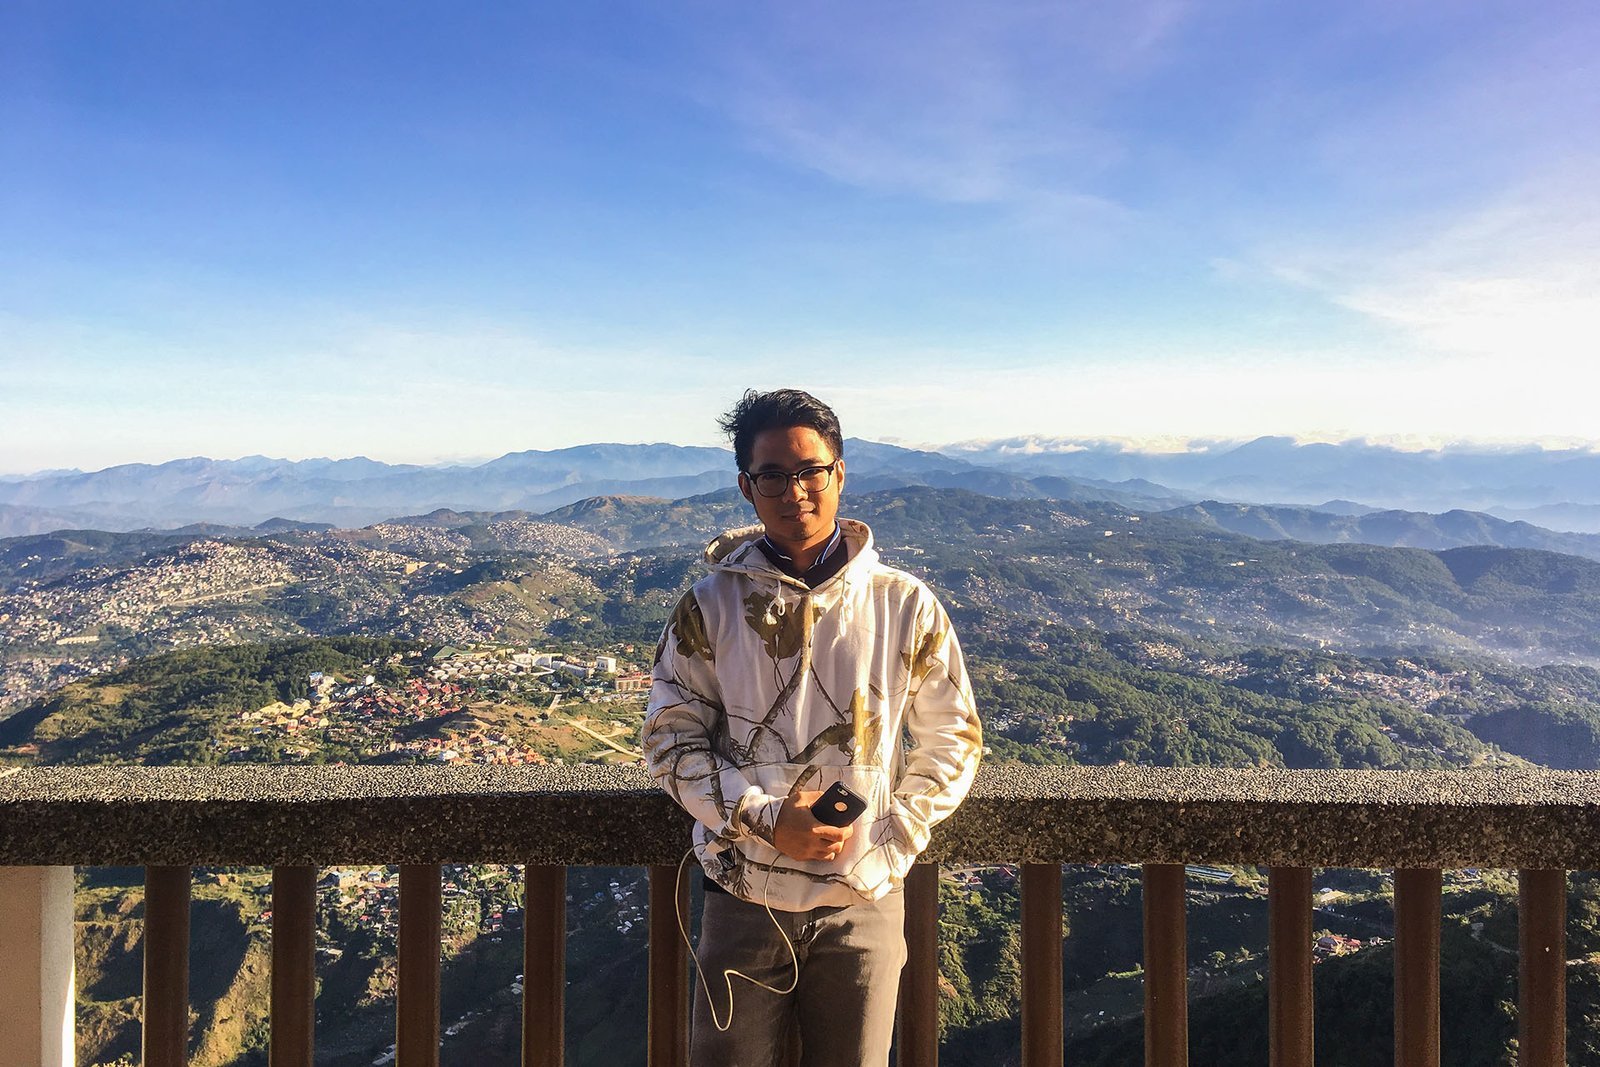 Photo taken in Cafe in the Sky Baguio City